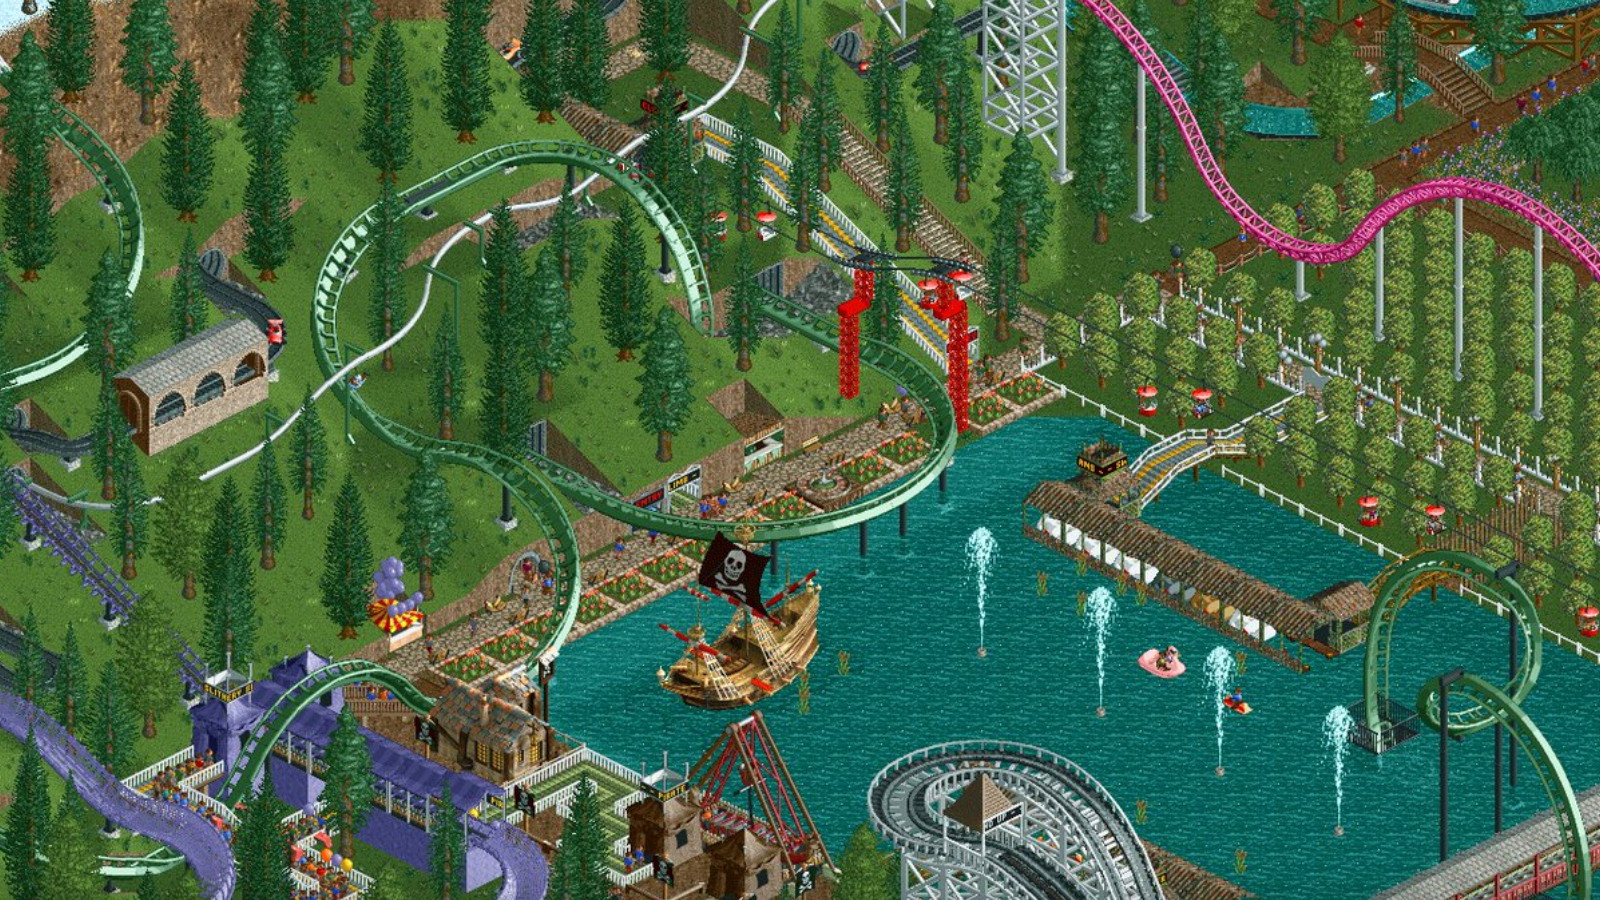 Camping tycoon. Rollercoaster Tycoon Classic. Rollercoaster Tycoon петля. Rollercoaster Tycoon балка спиральная. Rollercoaster Tycoon Classic PS Vita.